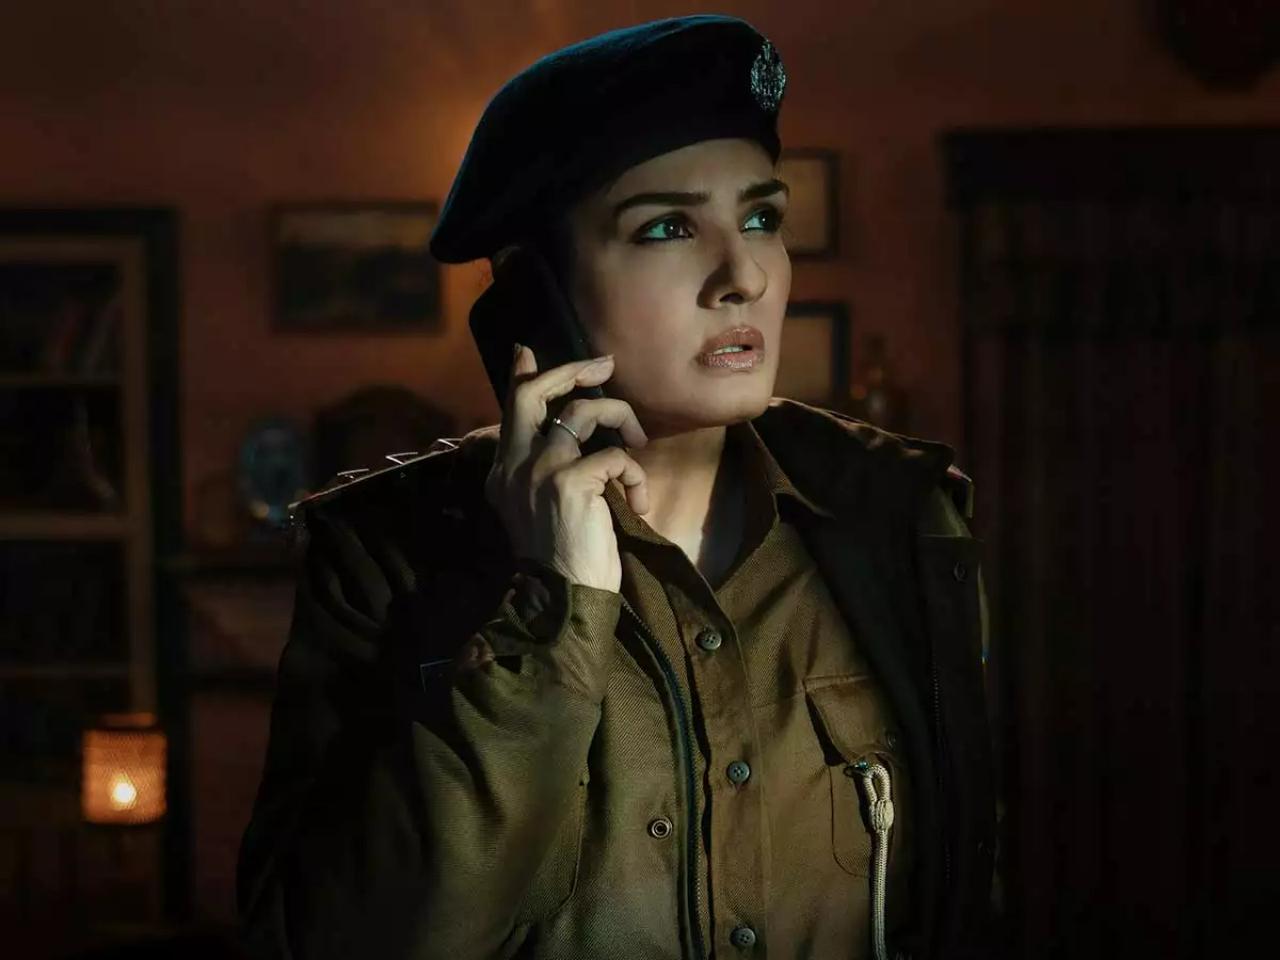 Raveena Tandon in Aranyak
Raveena Tandon portrayed the role of a cop named Kasturi Dogra in Aranyak. In the movie, her character embarks on a mission to revive a forgotten myth about a serial killer who operates in a dense forest